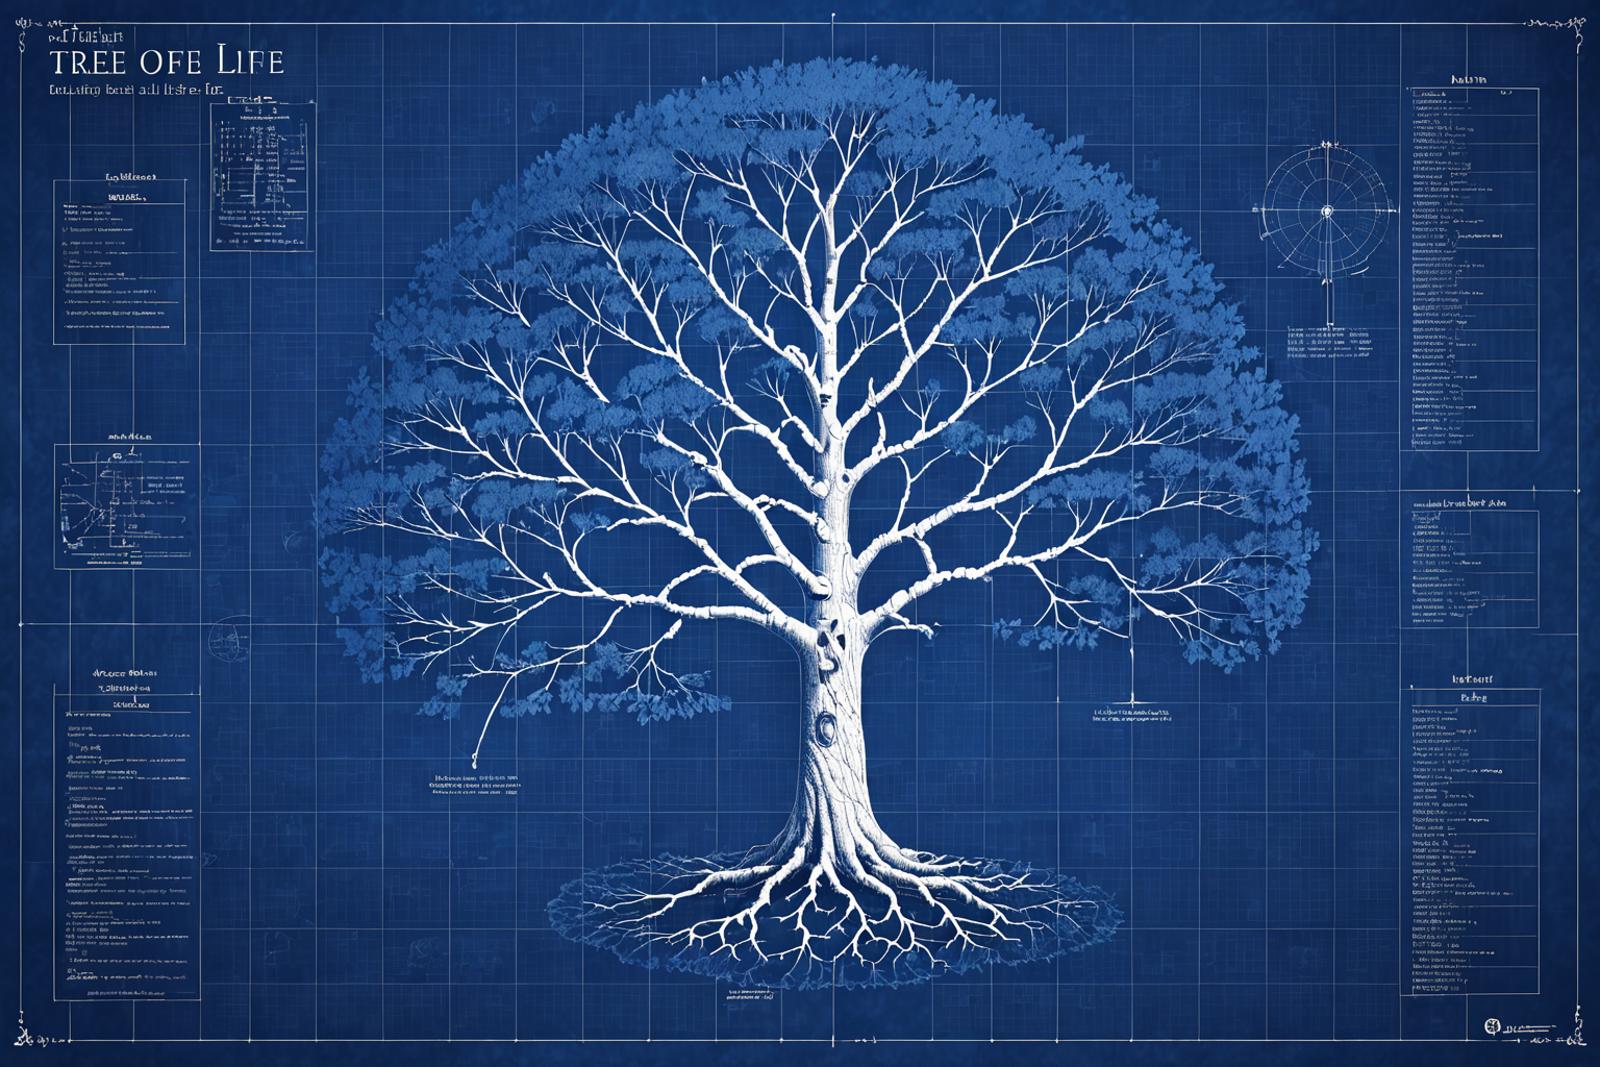 Tree with roots and branches in blue and white, with a text background.